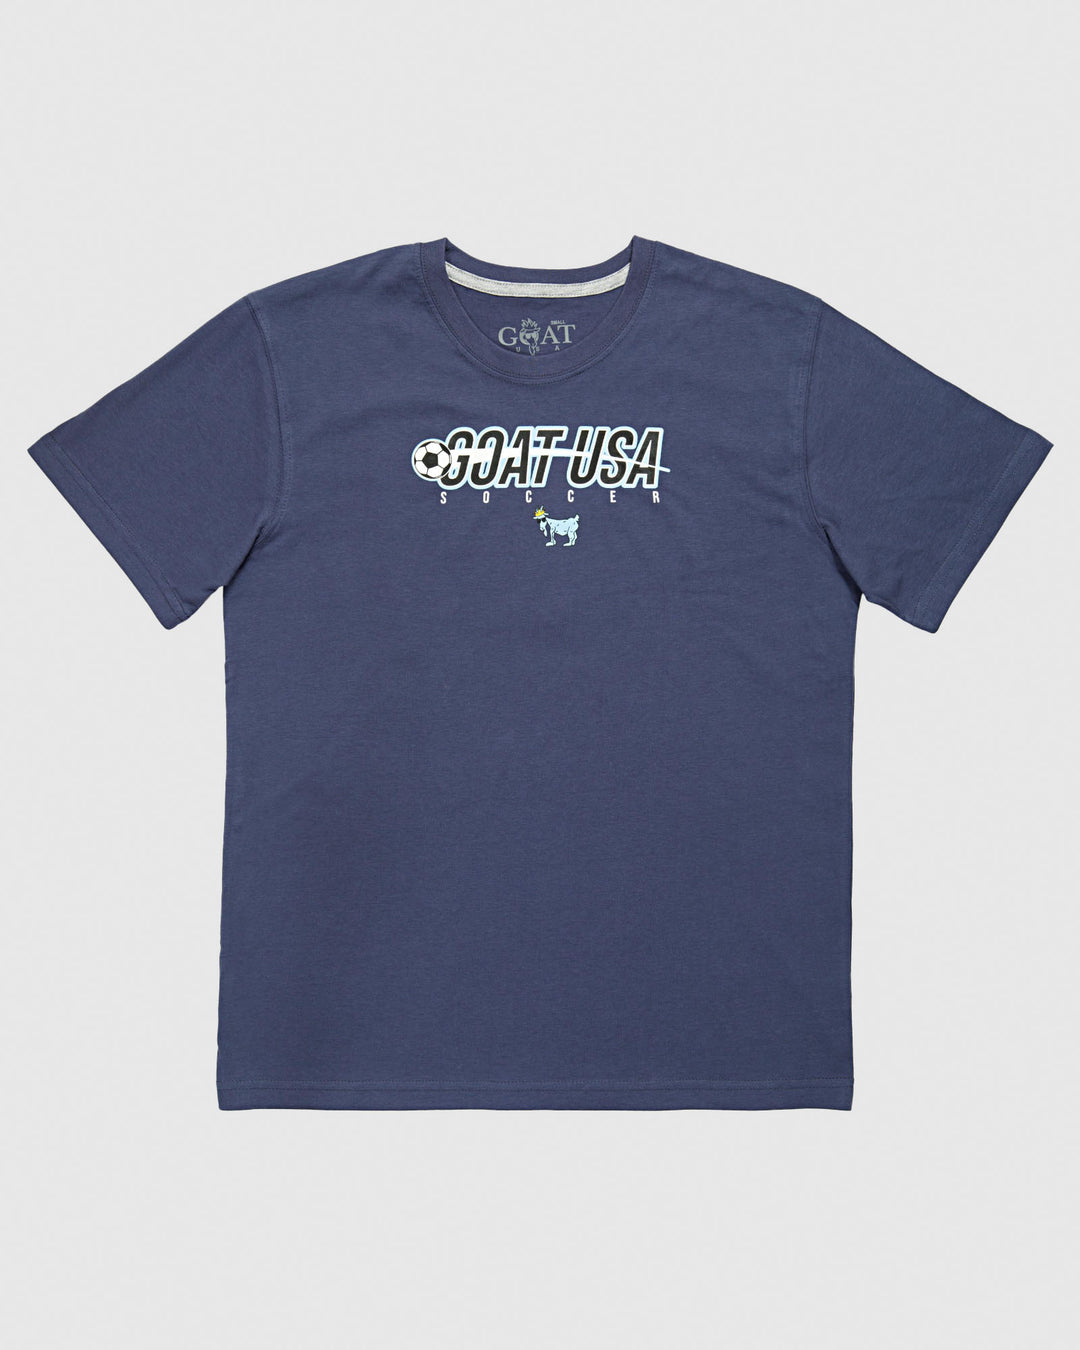 Navy shirt with soccer ball that goes through the wording "GOAT USA"